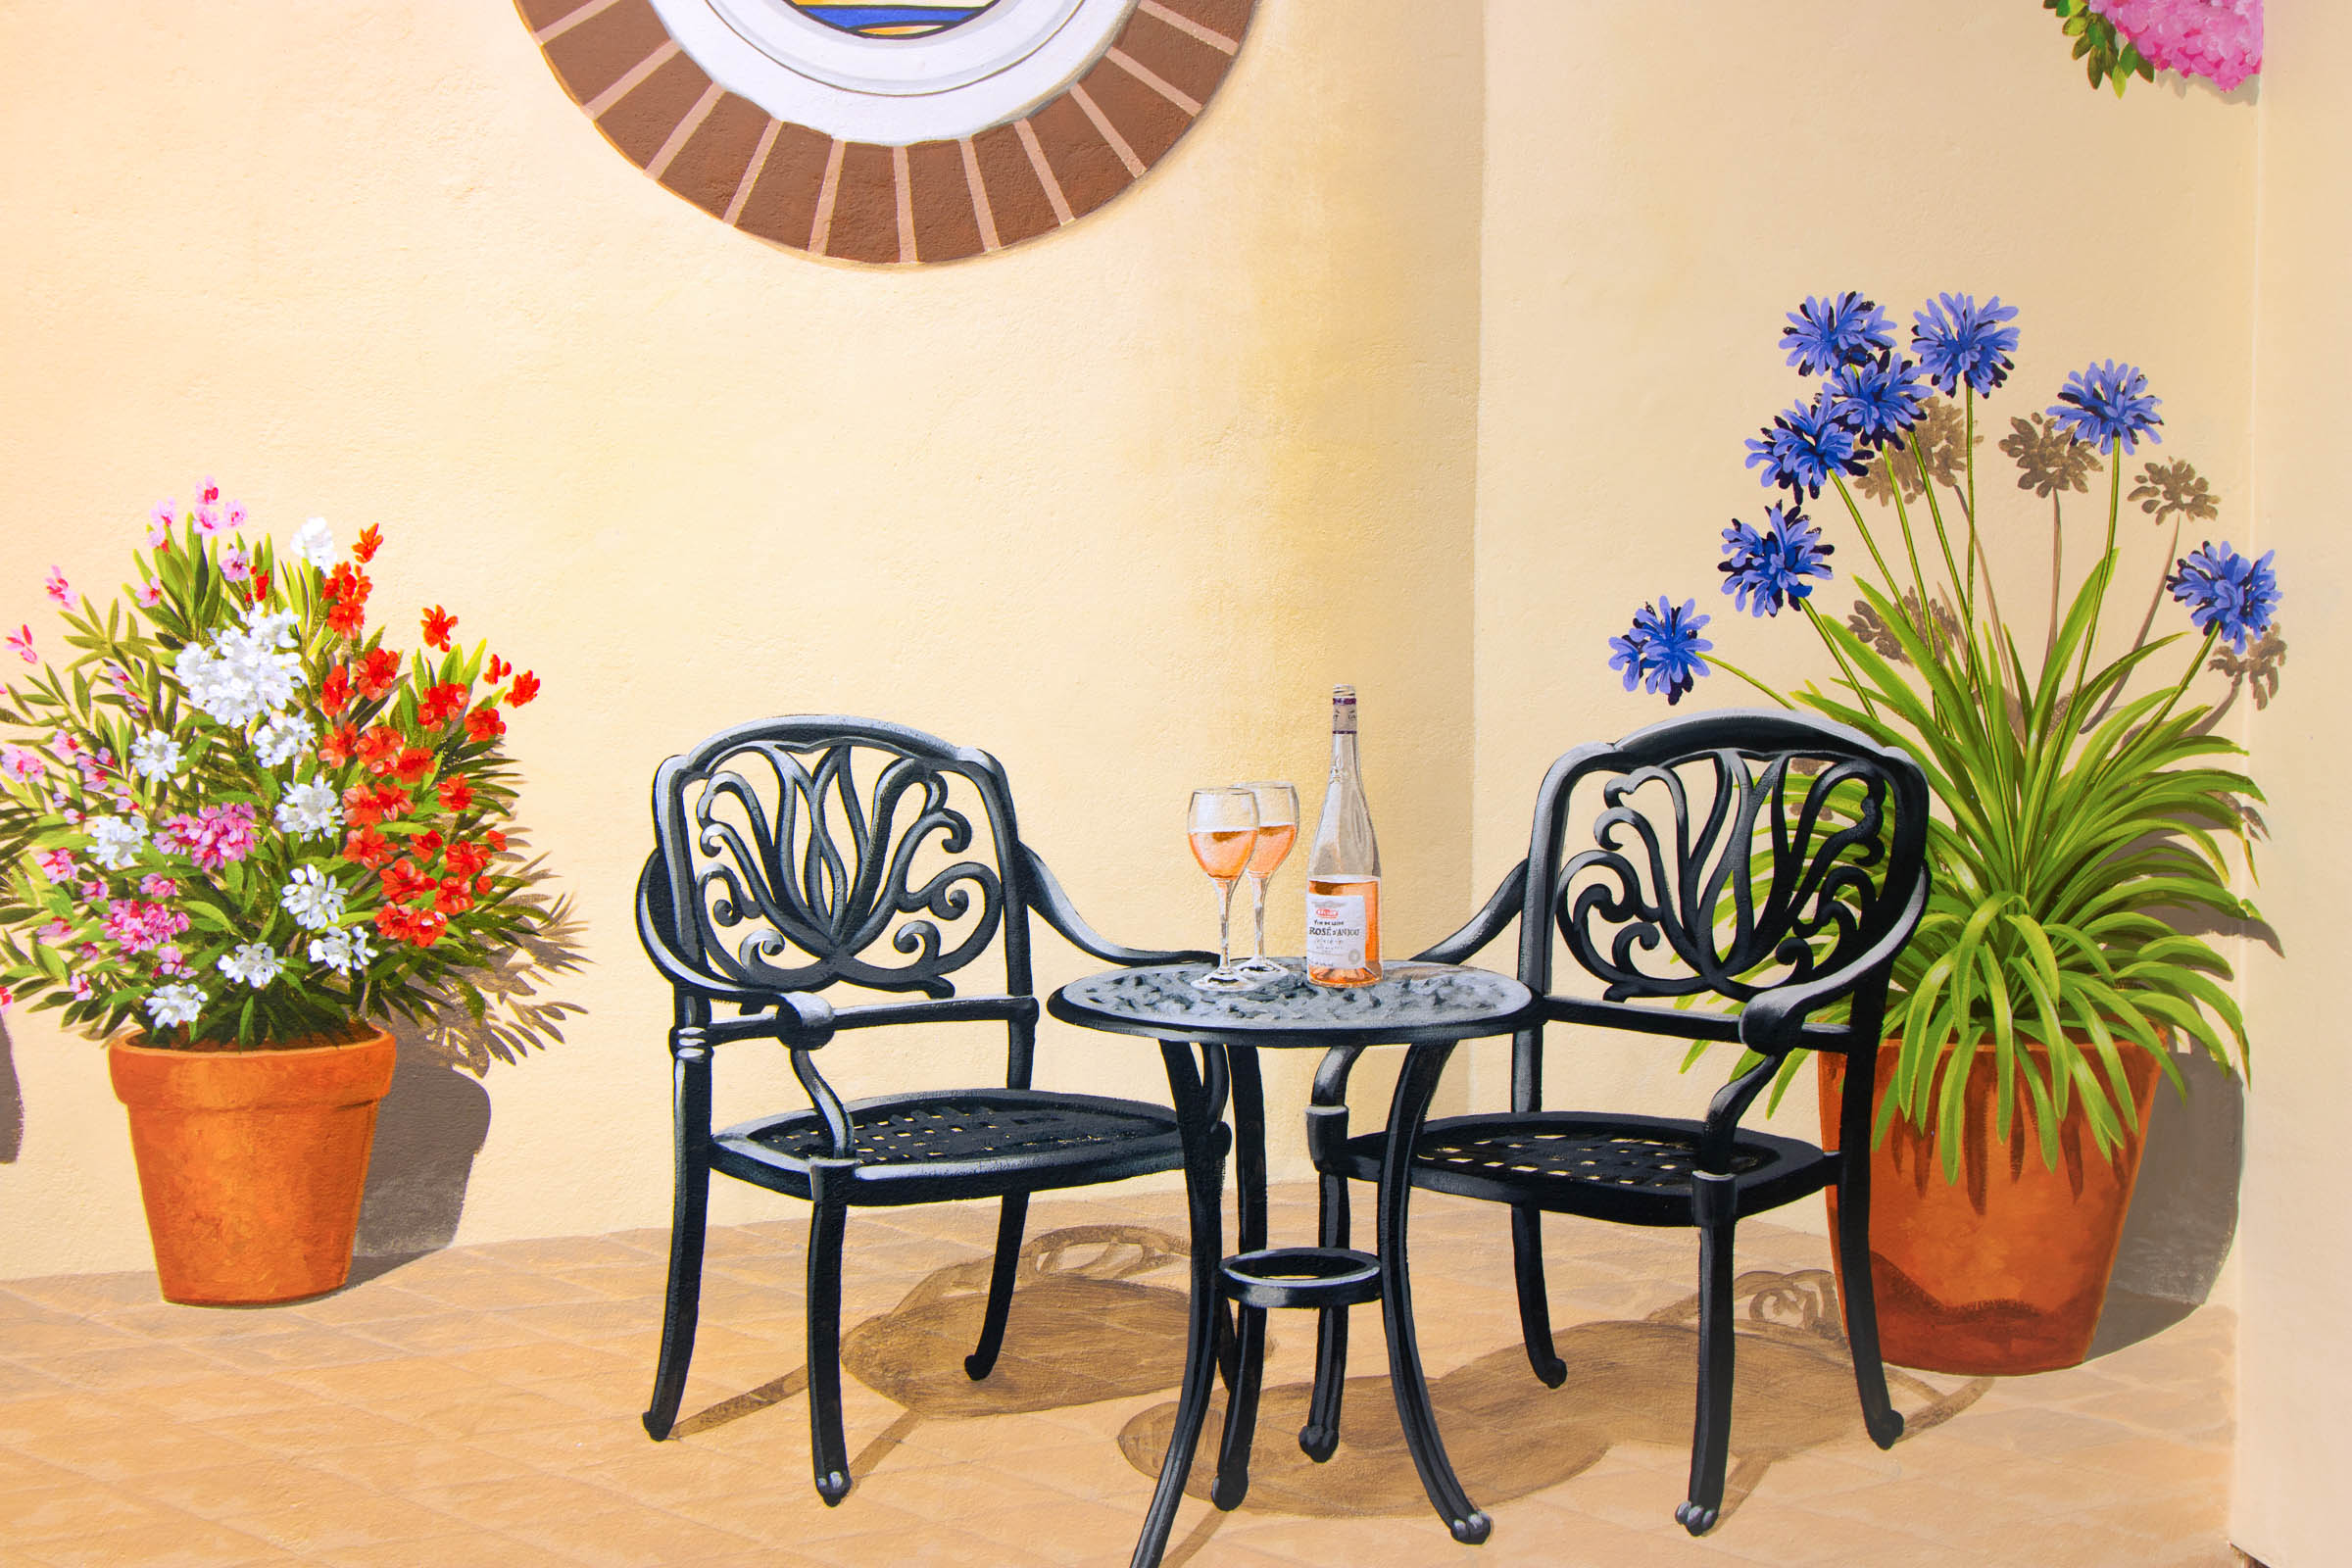 Patio trompe l'oeil with inviting table and chairs, flanked by splendid oleander and agapanthus